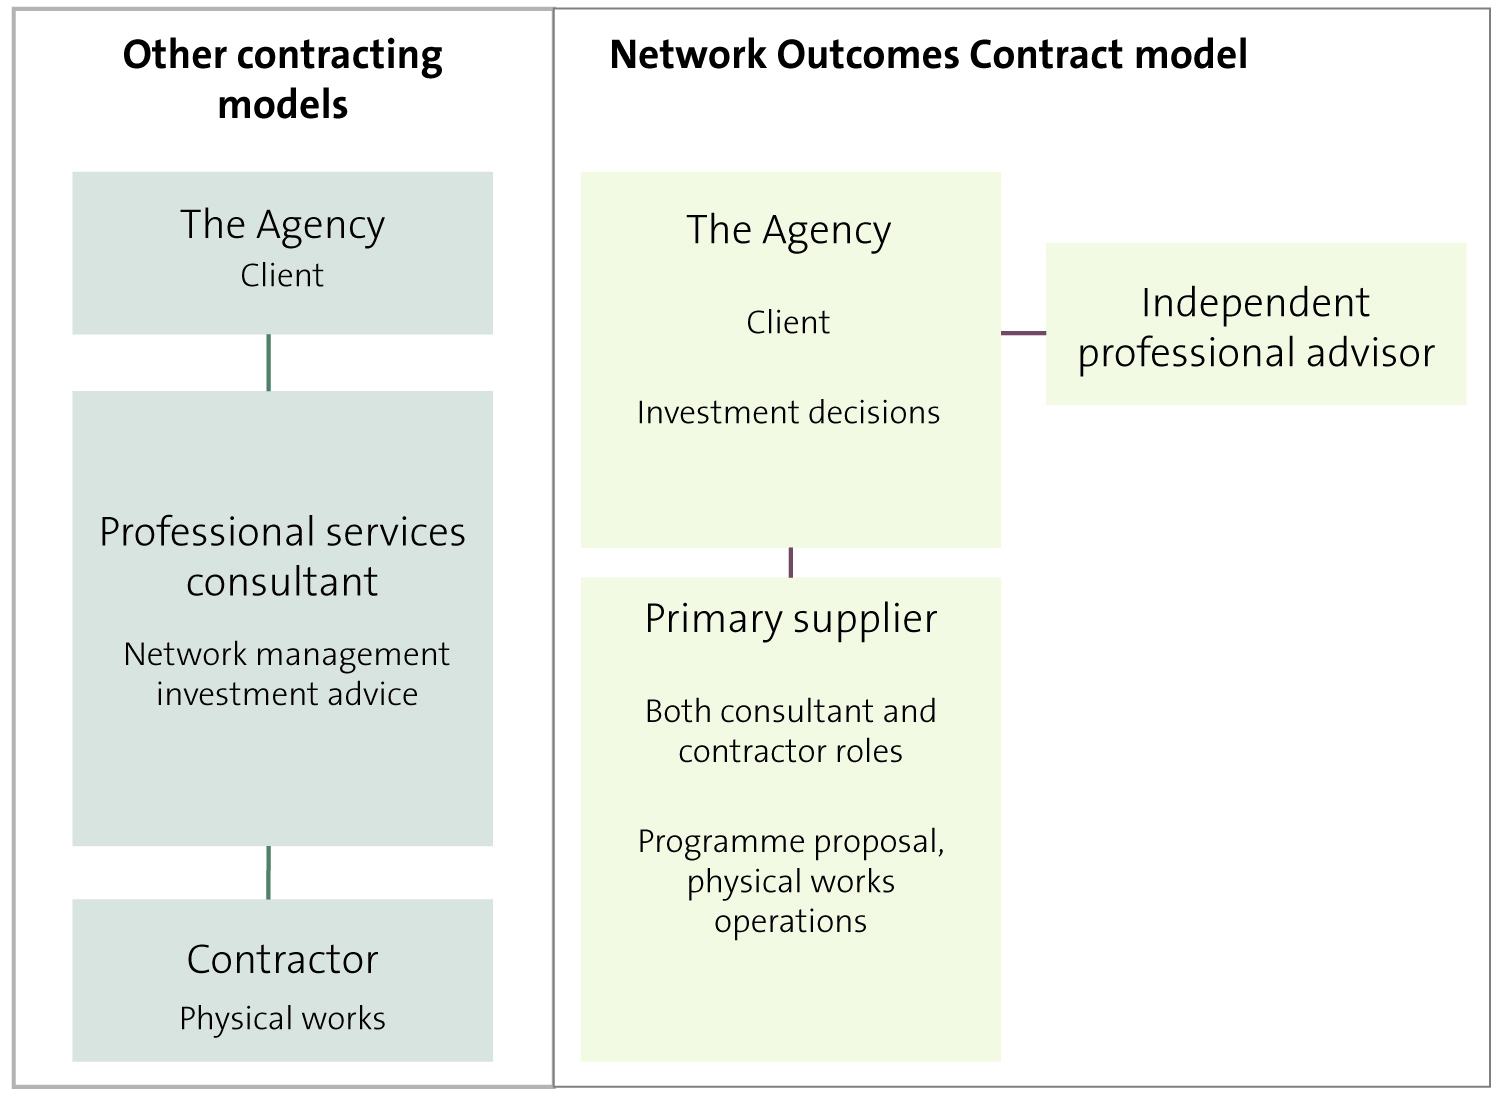 Figure 3 - Other contracting models compared with the Network Outcomes Contract model